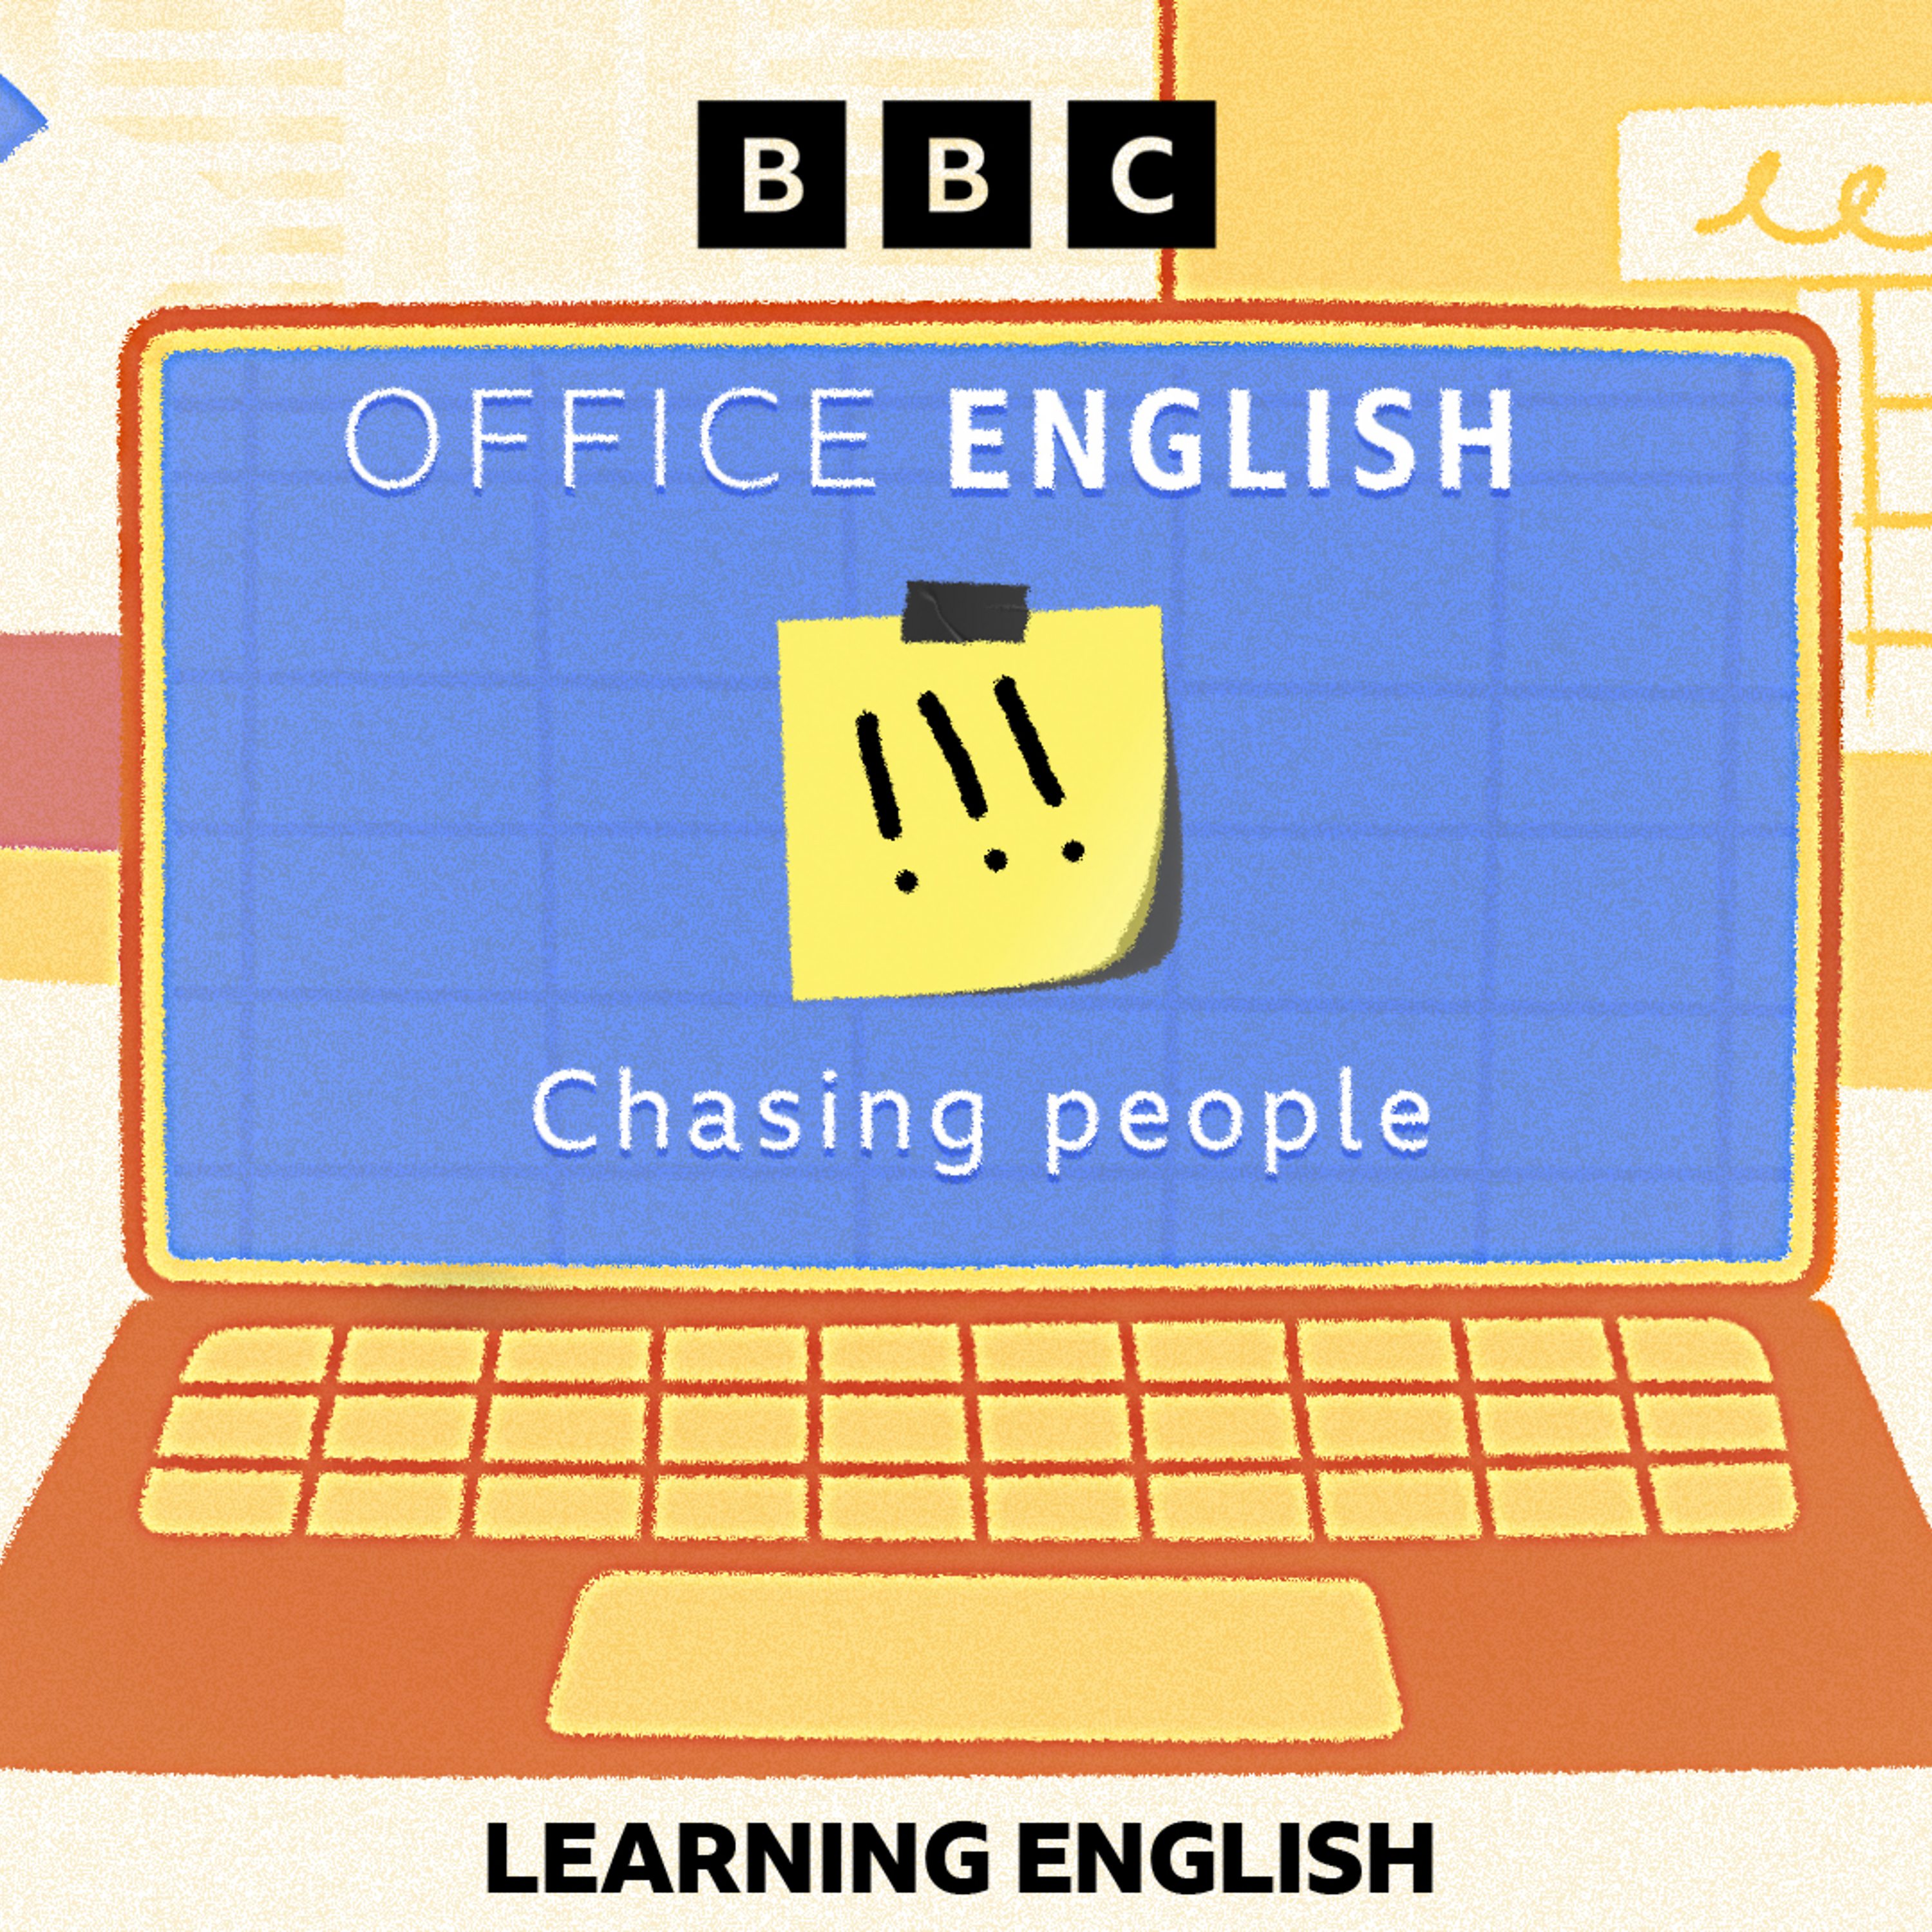 Office English: Chasing people